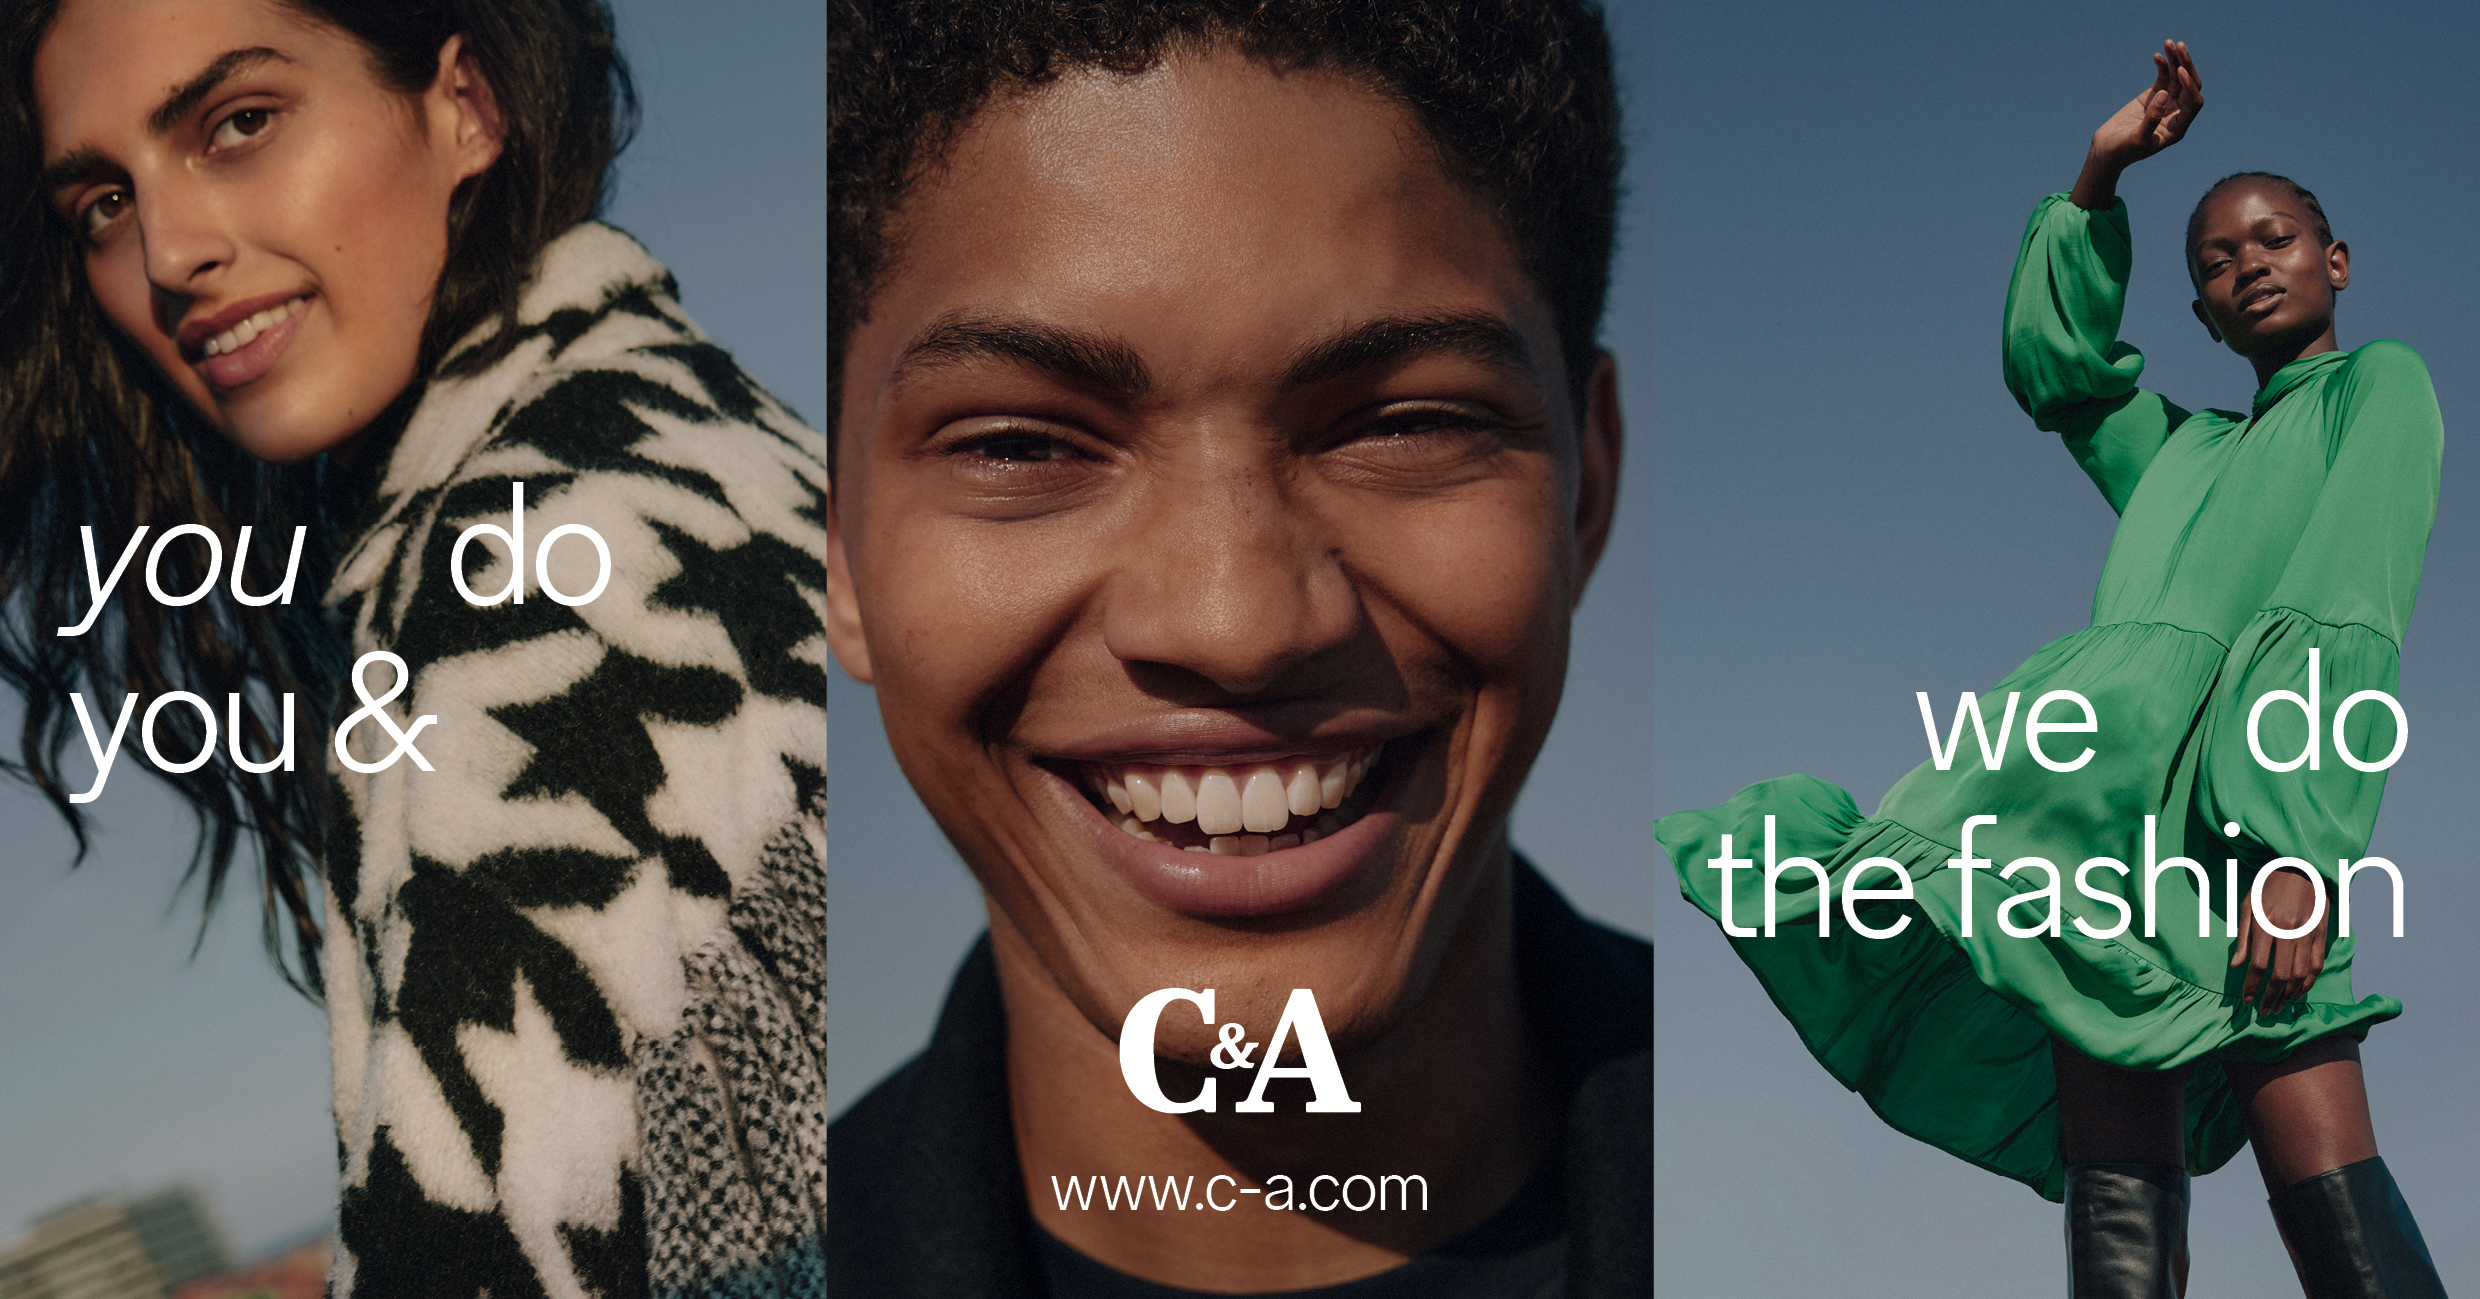 Building a modern shopping experience for C&A - DEPT®